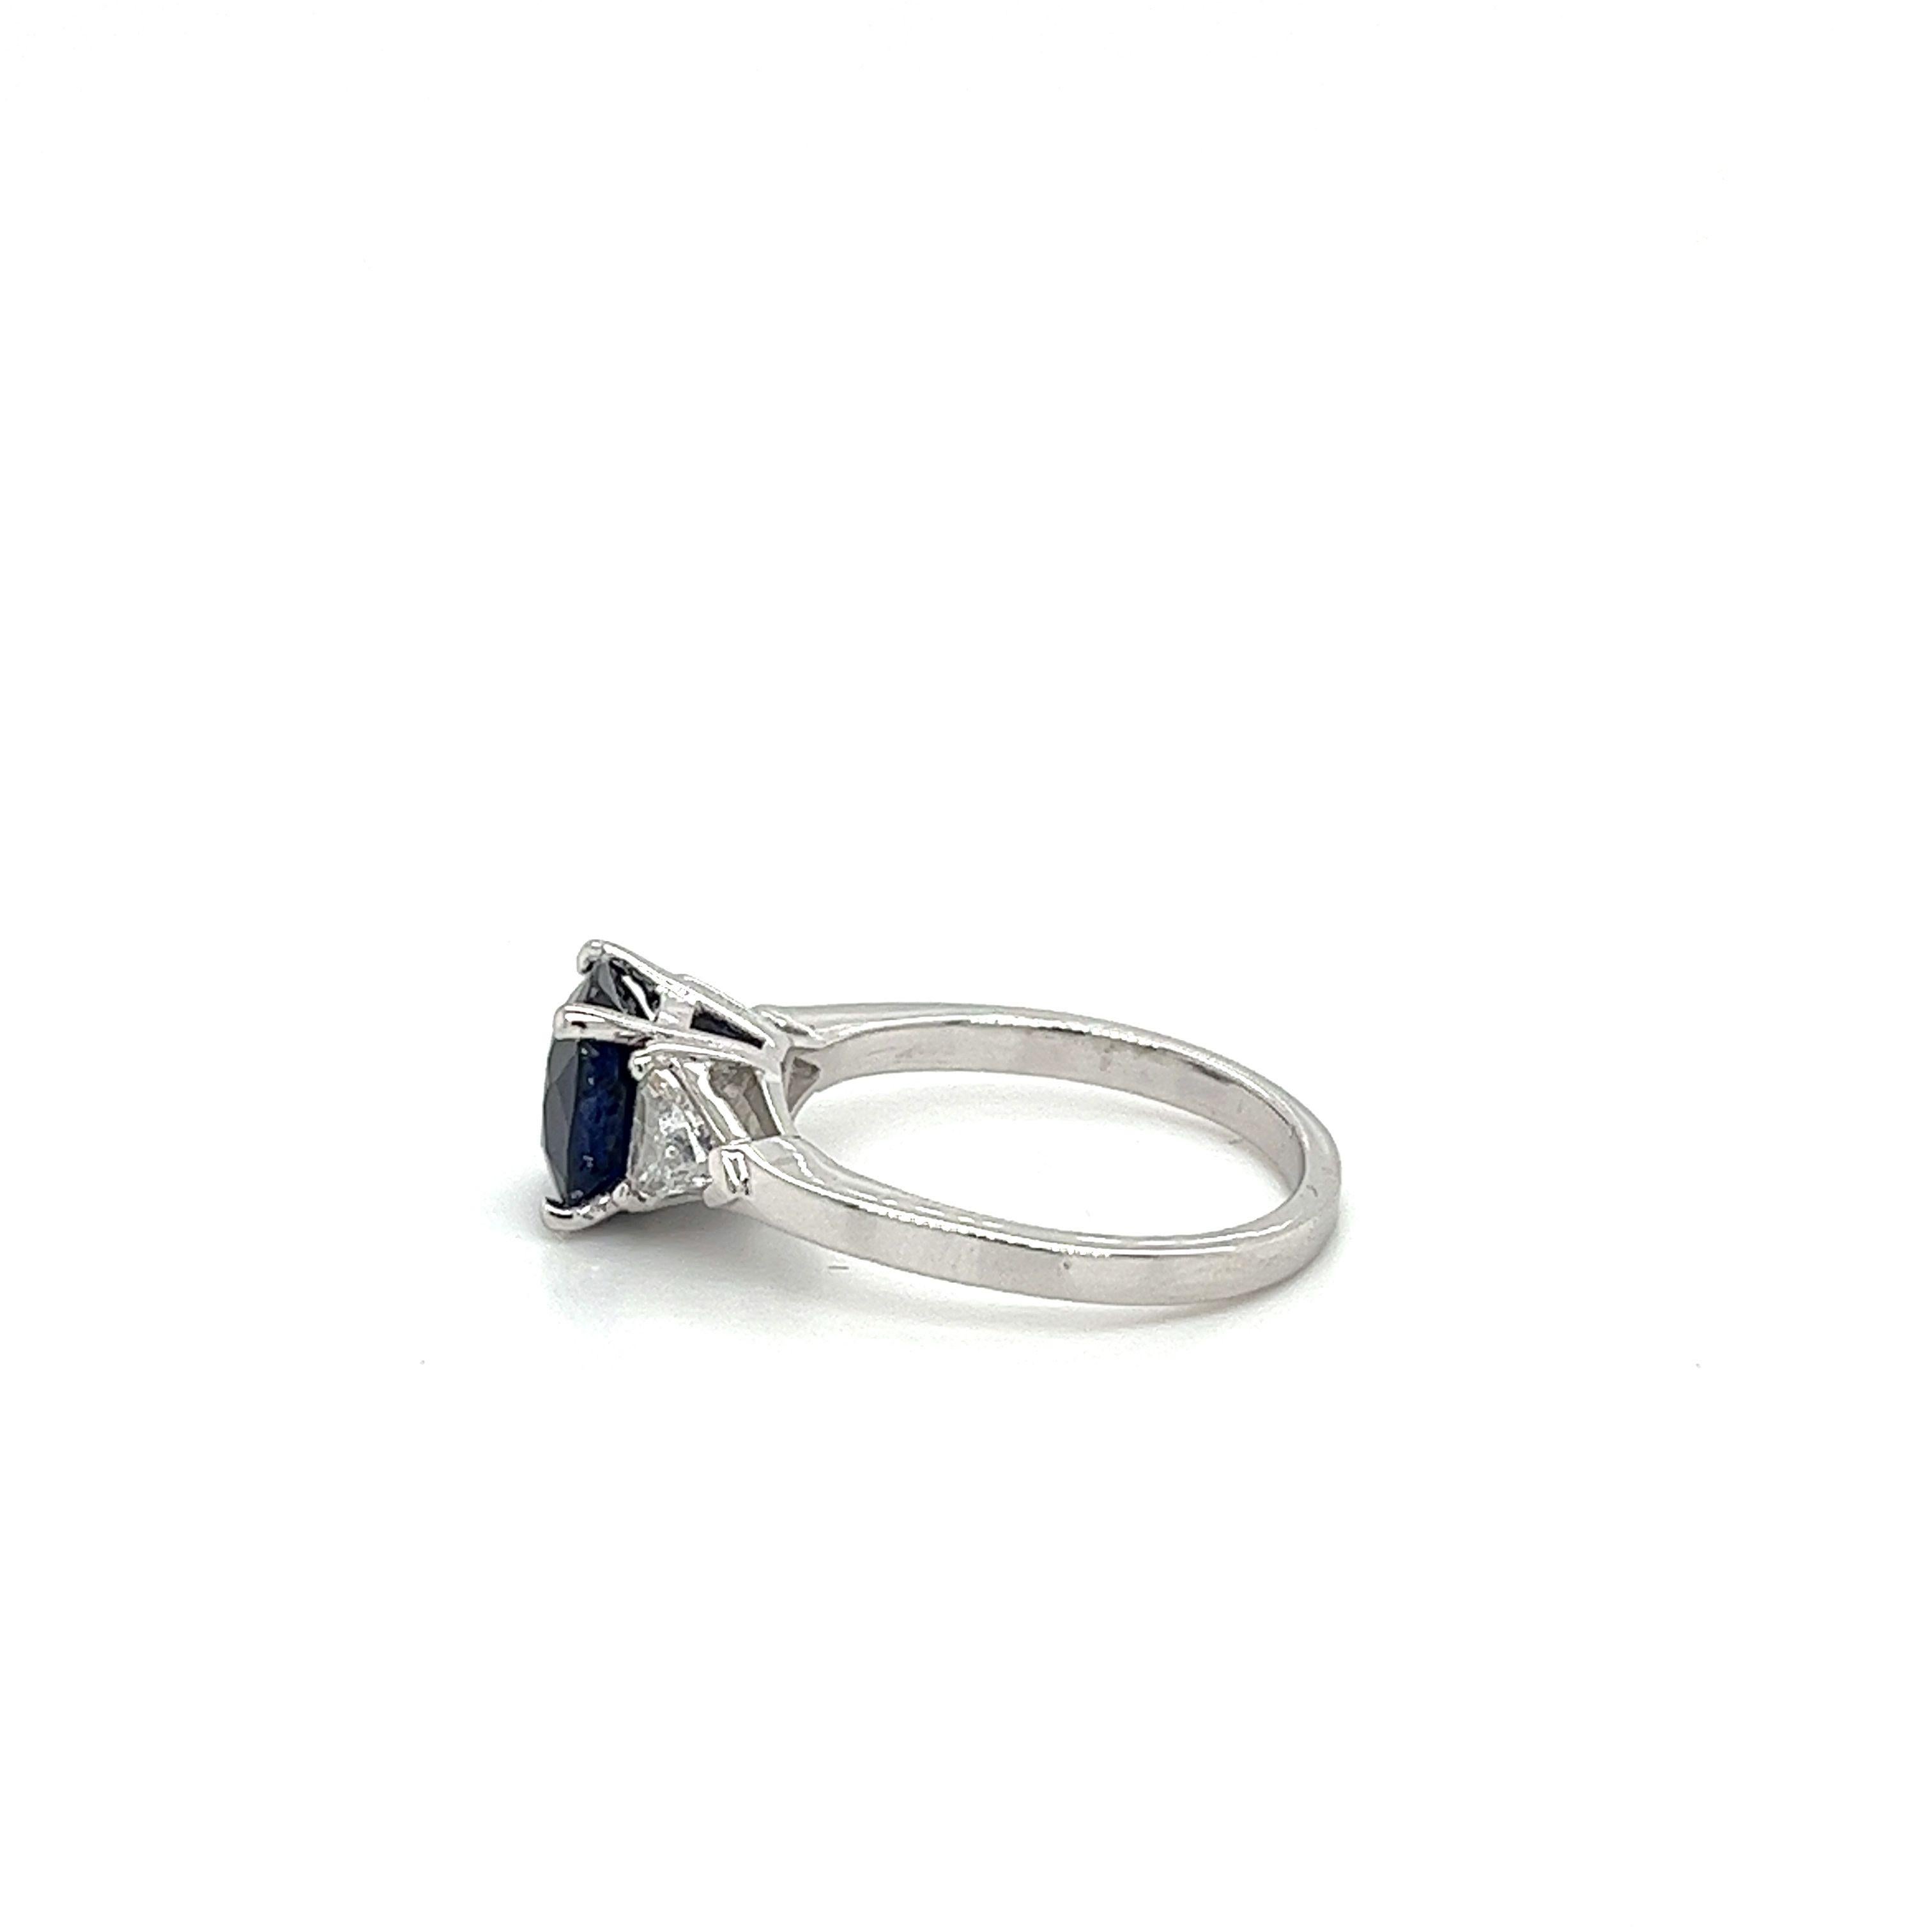 GIA Certified 2.63 Carat Blue Sapphire Ring with Trillion Cut Diamond Sidestones In New Condition For Sale In Miami, FL